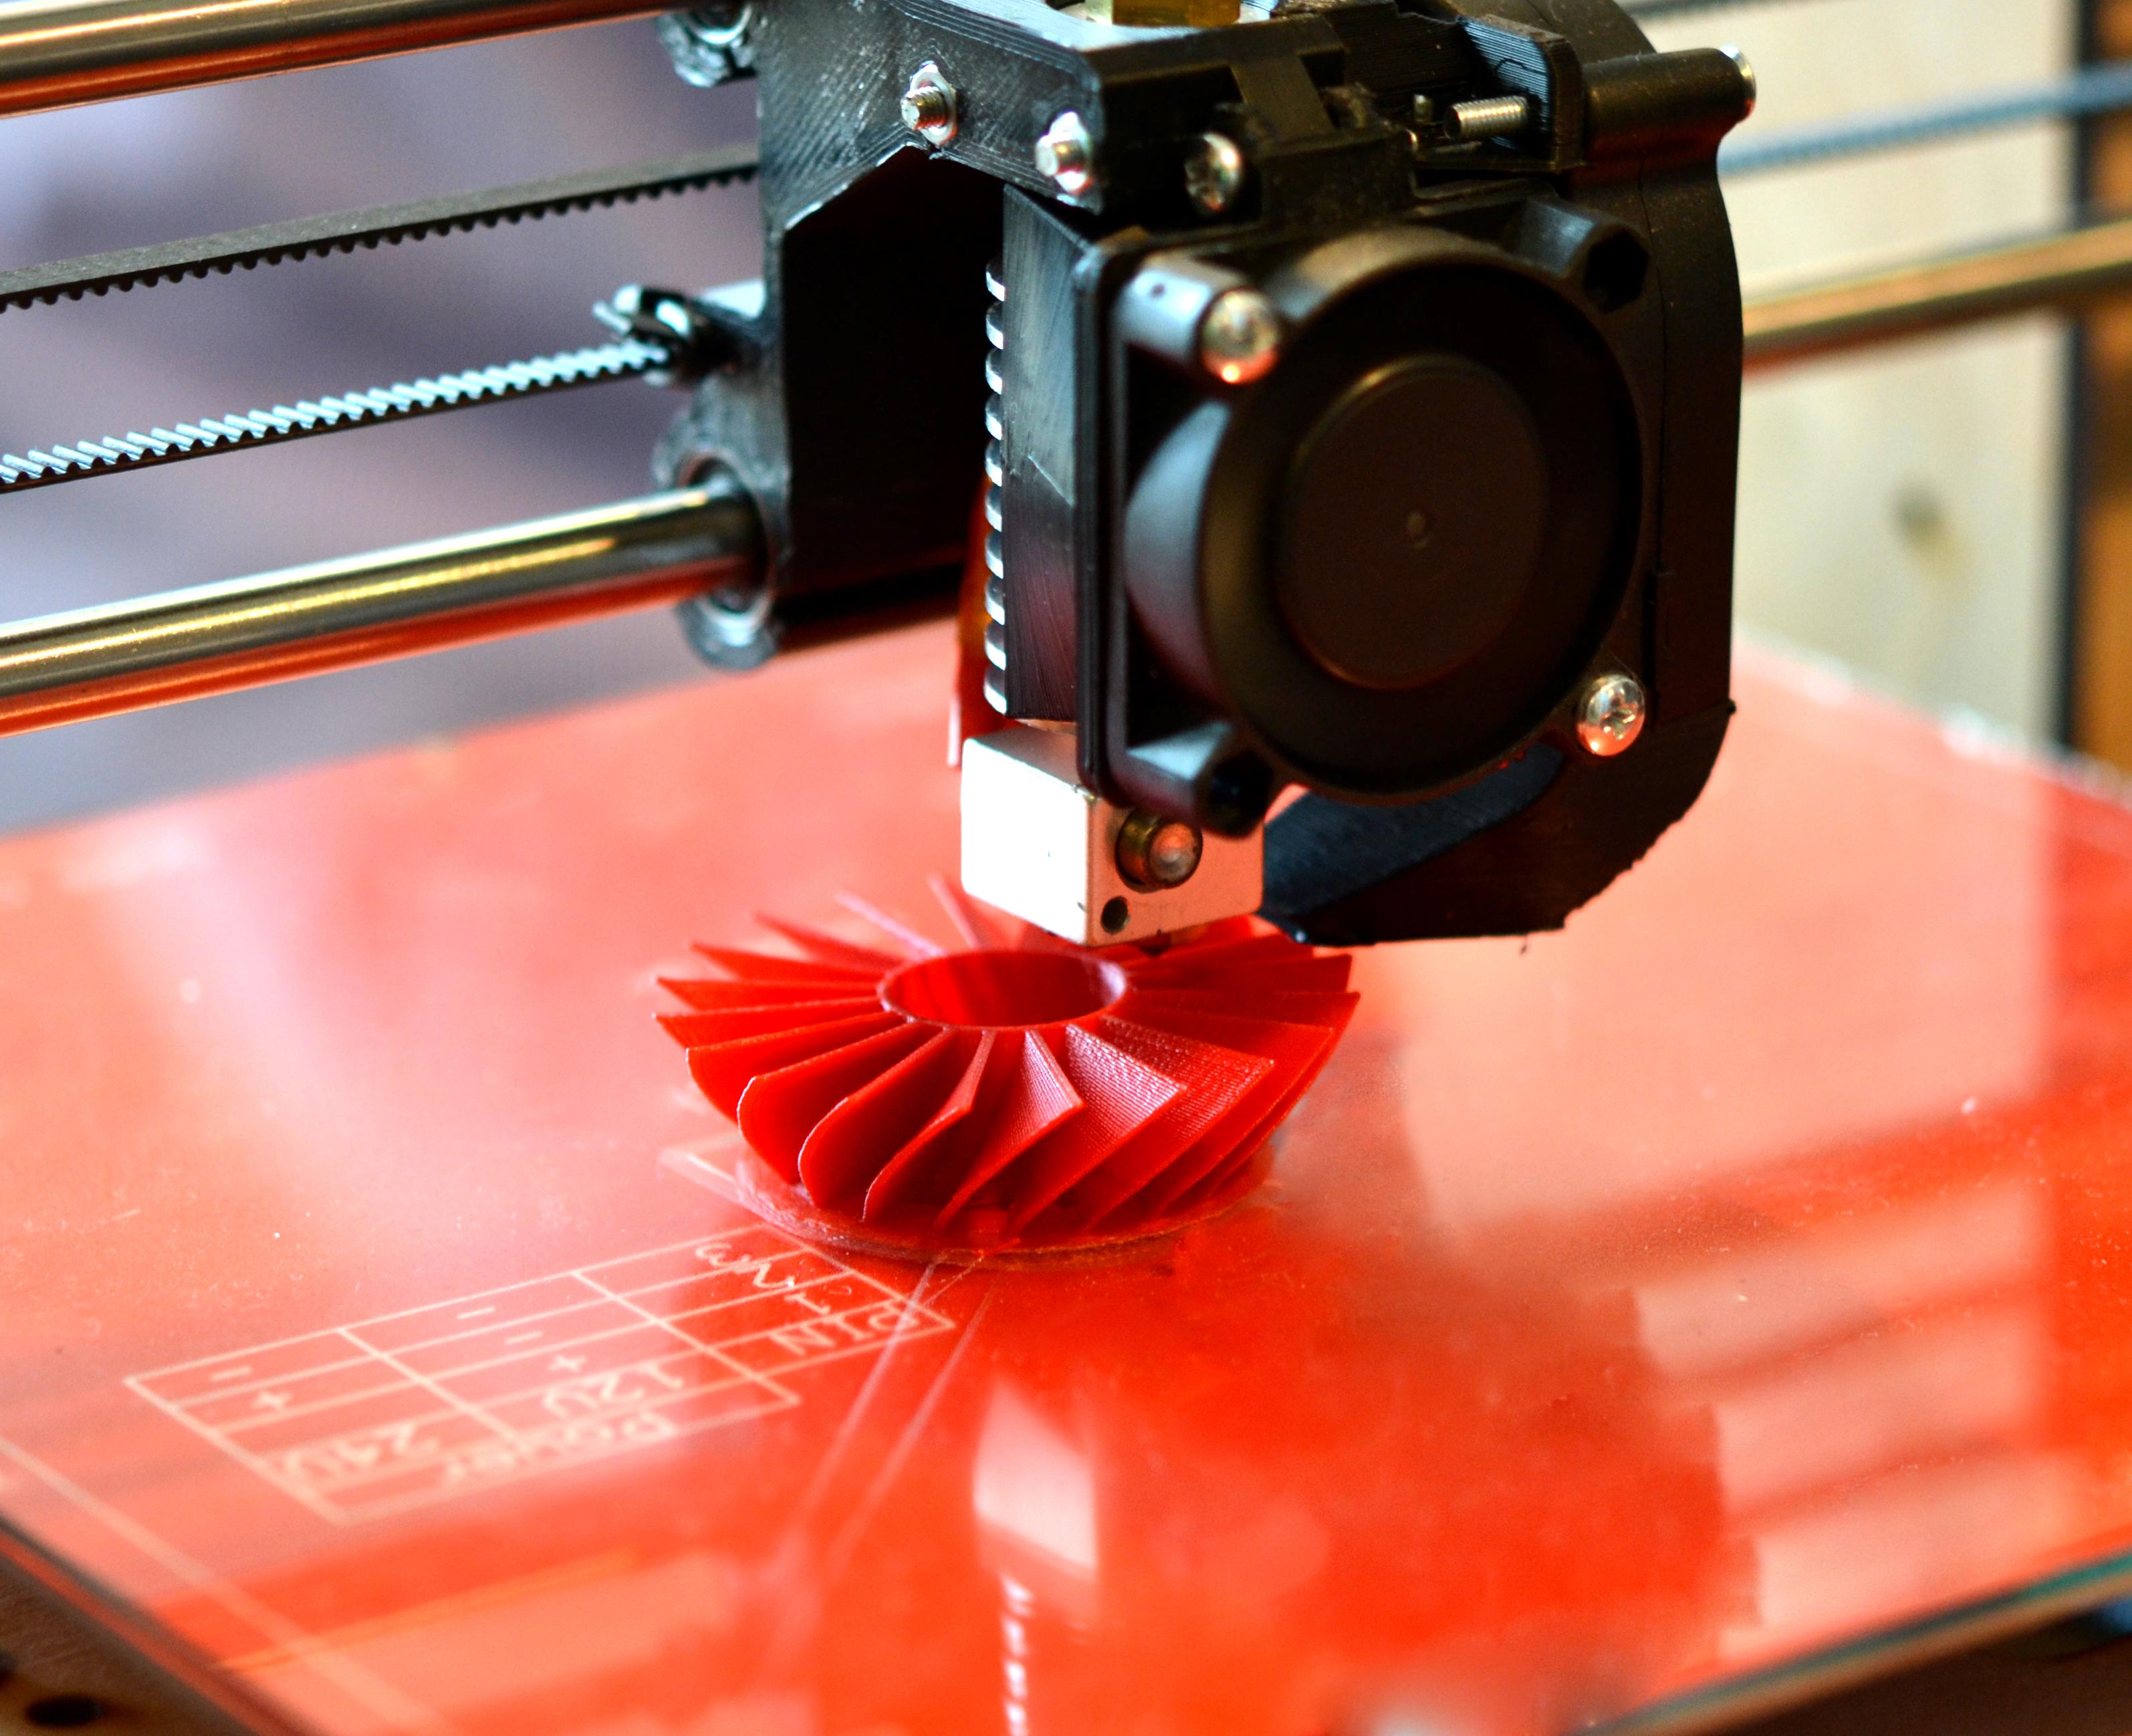 Learning Library: 3D Printing Beginner Workshop (Ages 16+) - CANCELLED